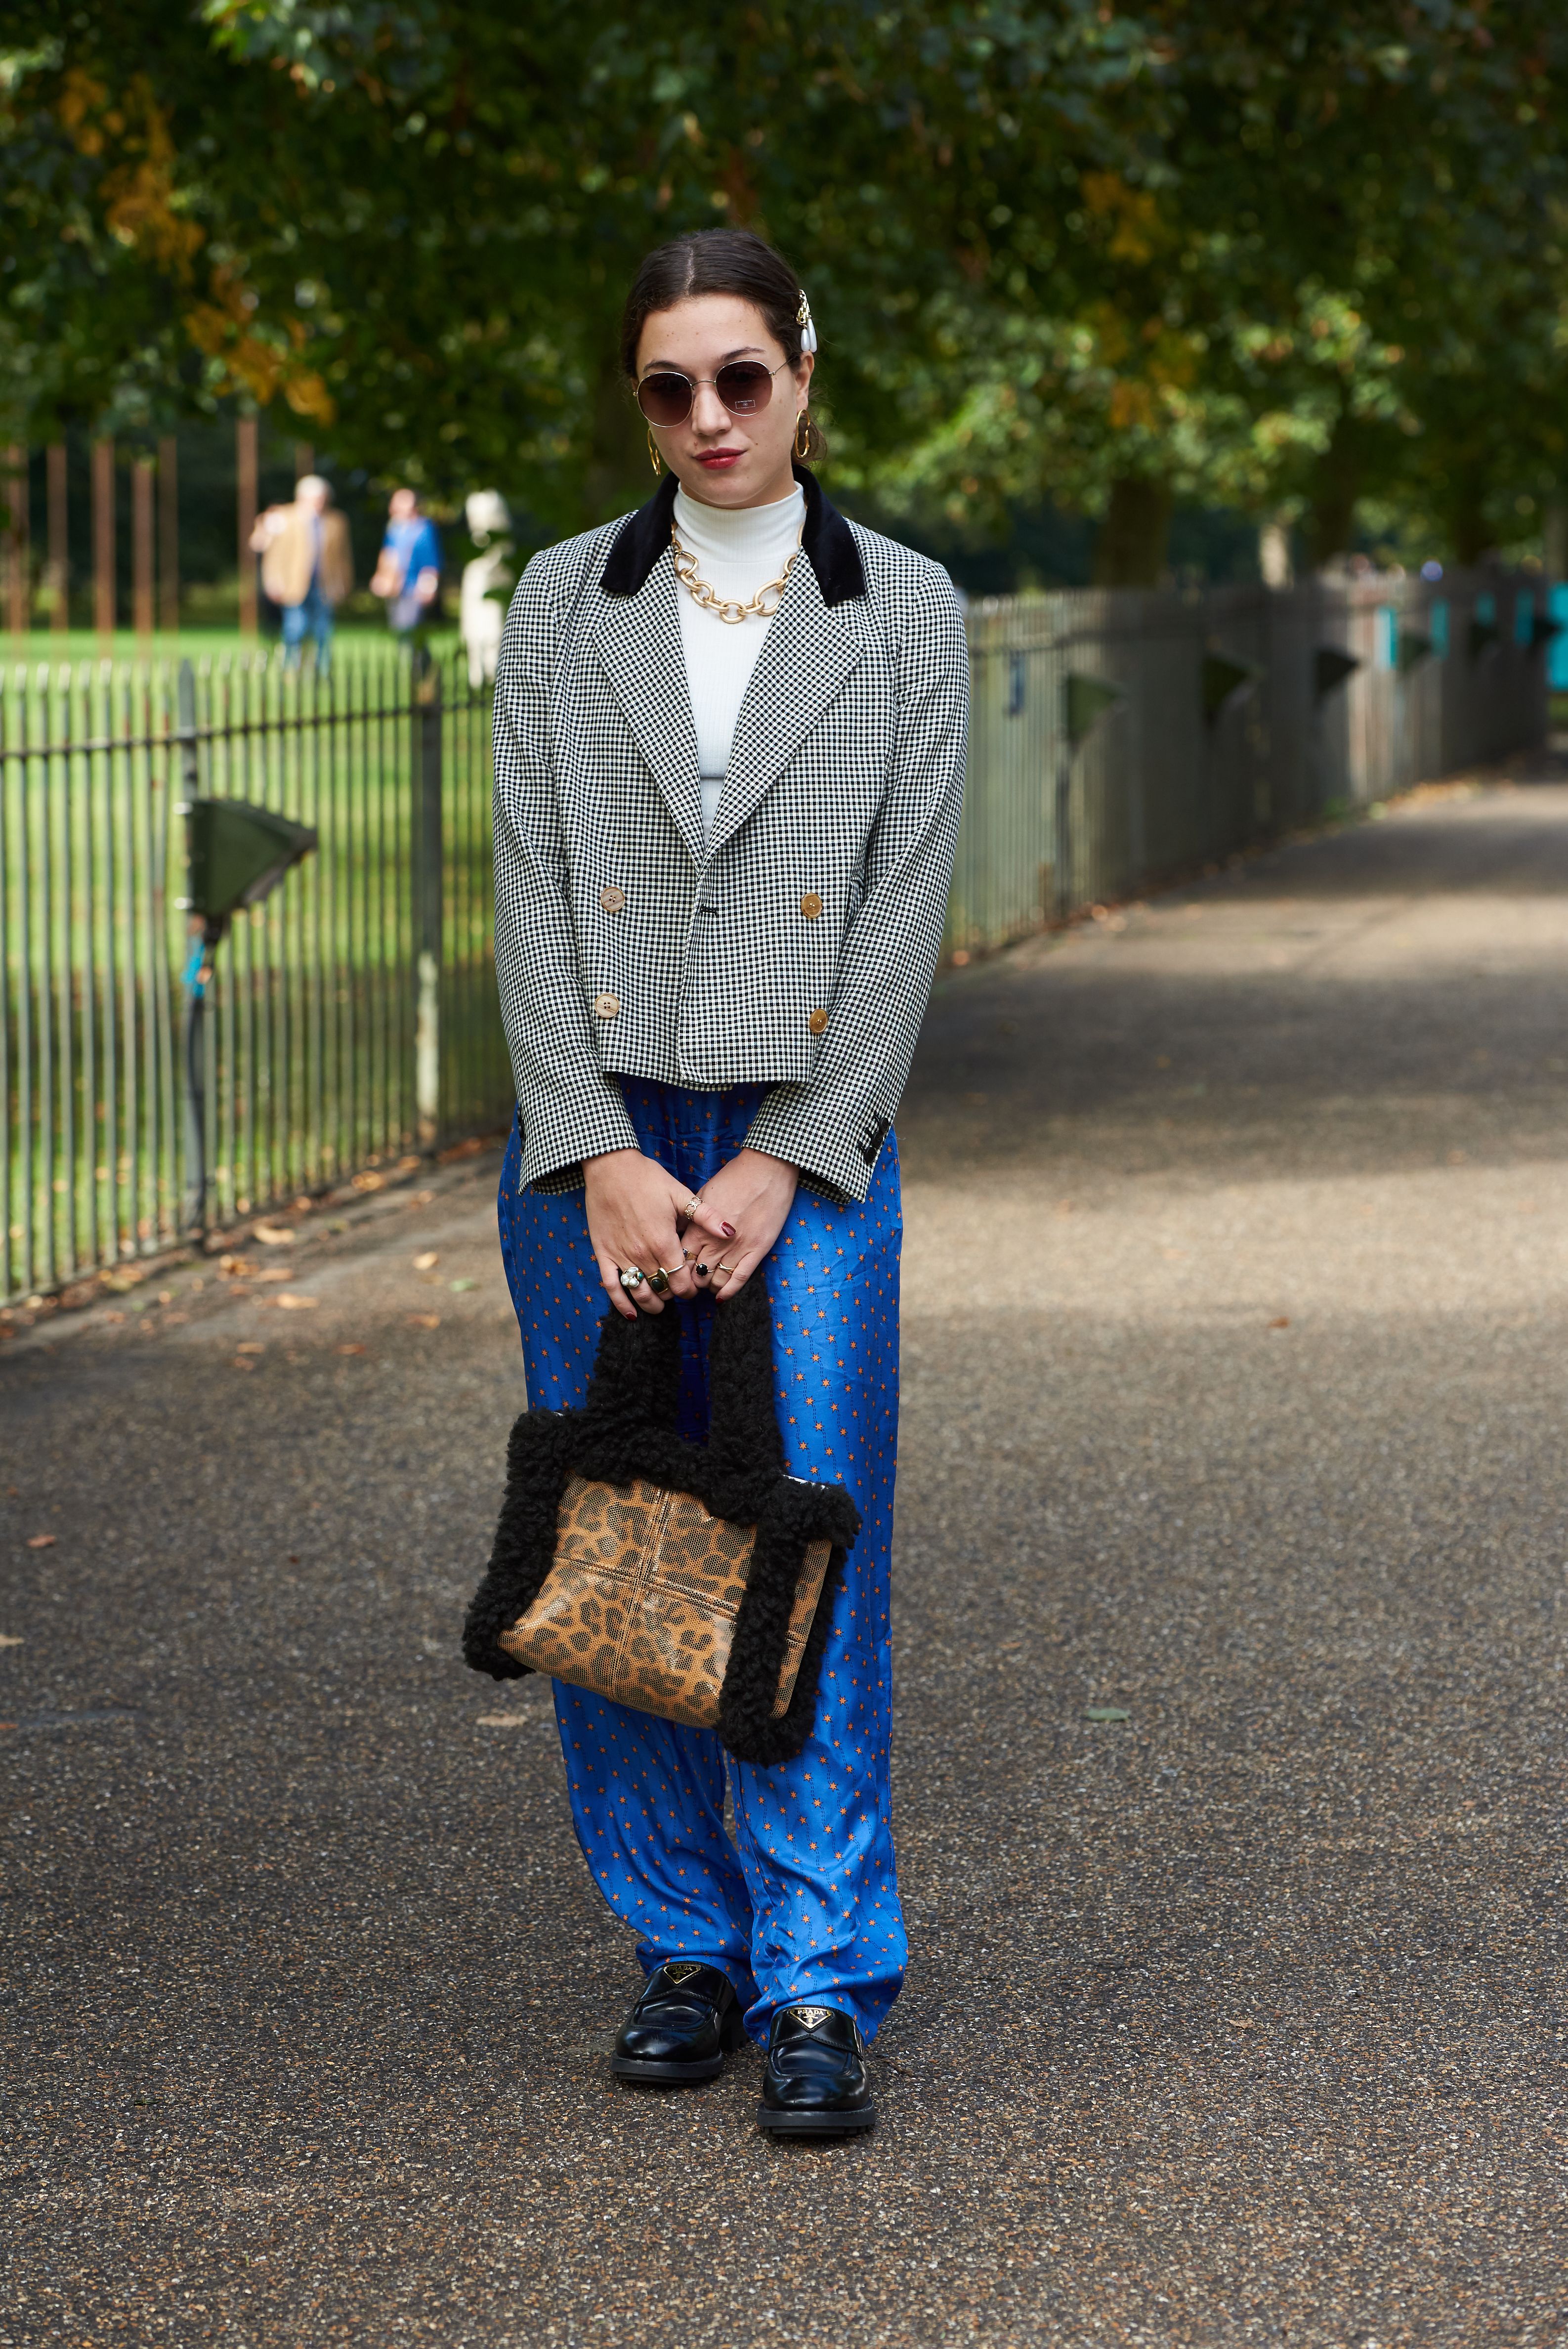 The handbag and the trousers were both rented from Hurr, pictured here at London Fashion Week.